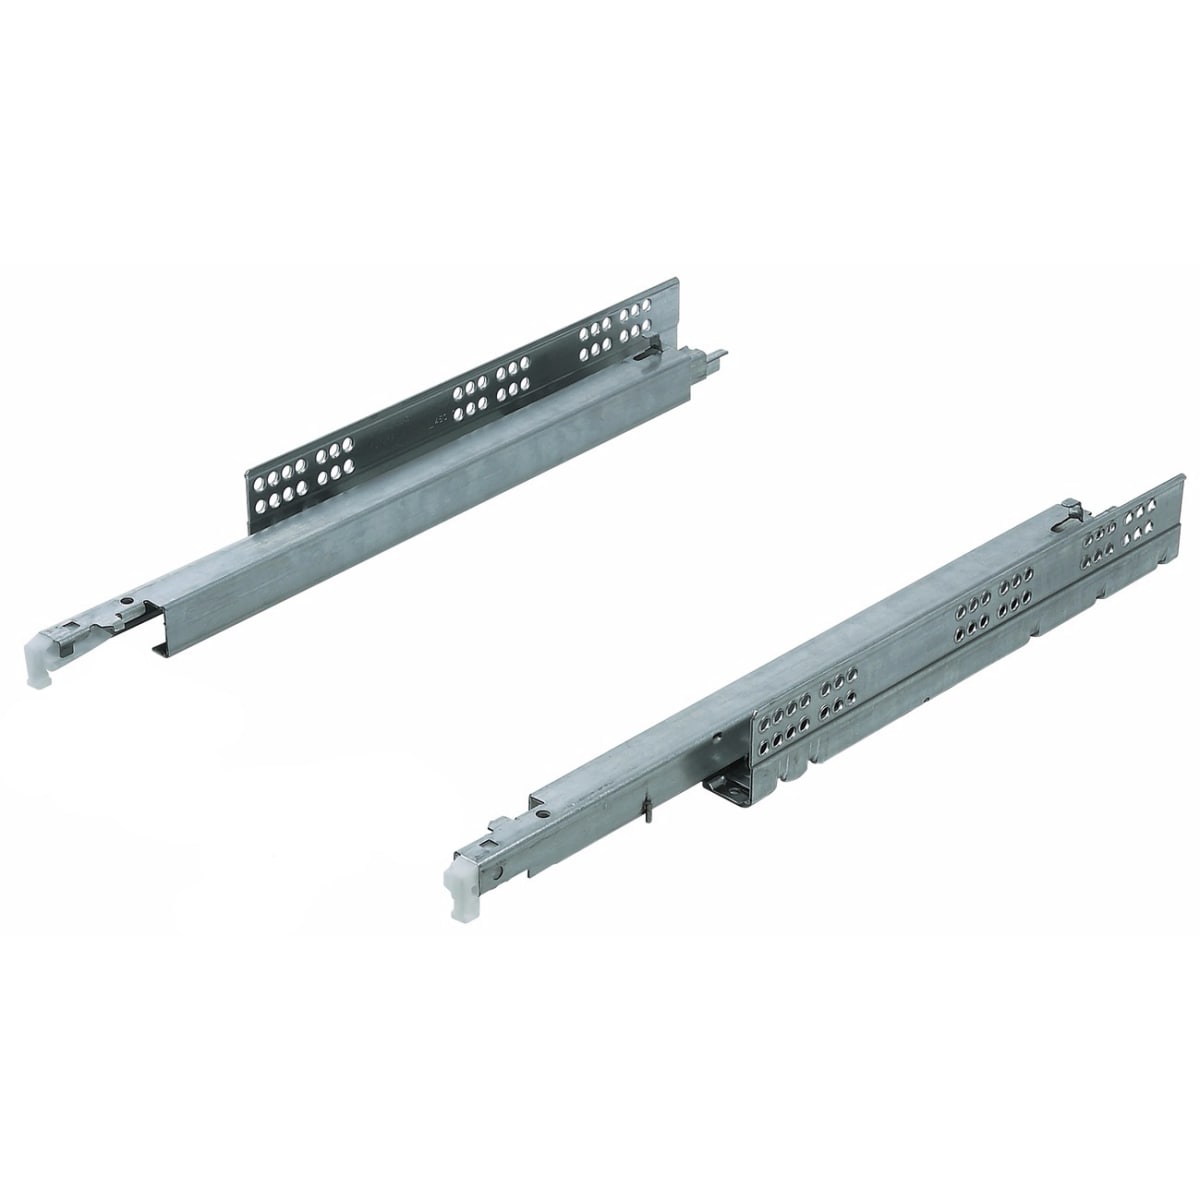 Hafele 545.47.256 Wall Filler Pull-Out